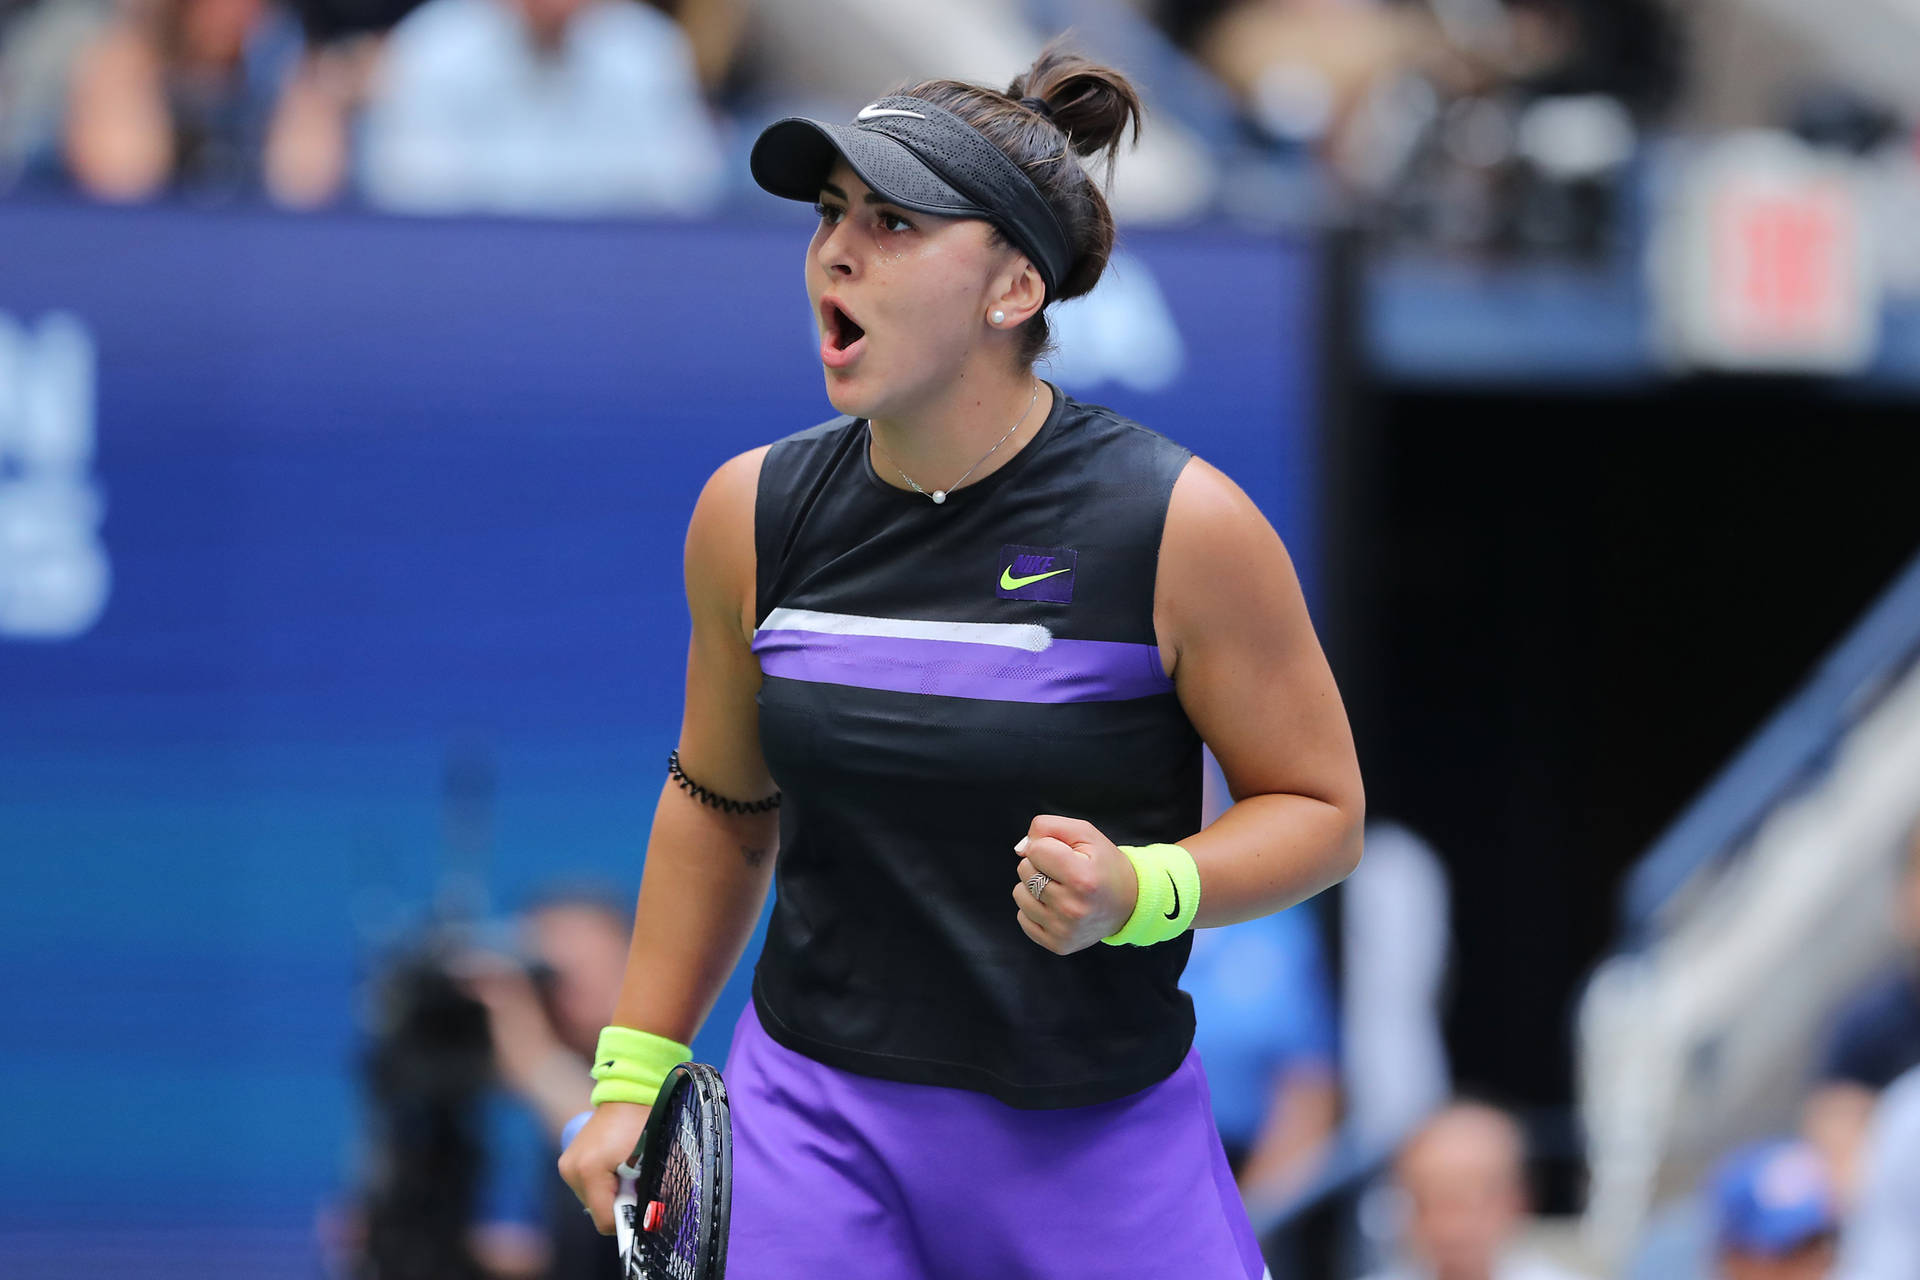 Bianca Andreescu’s Shocked Expression Wallpaper